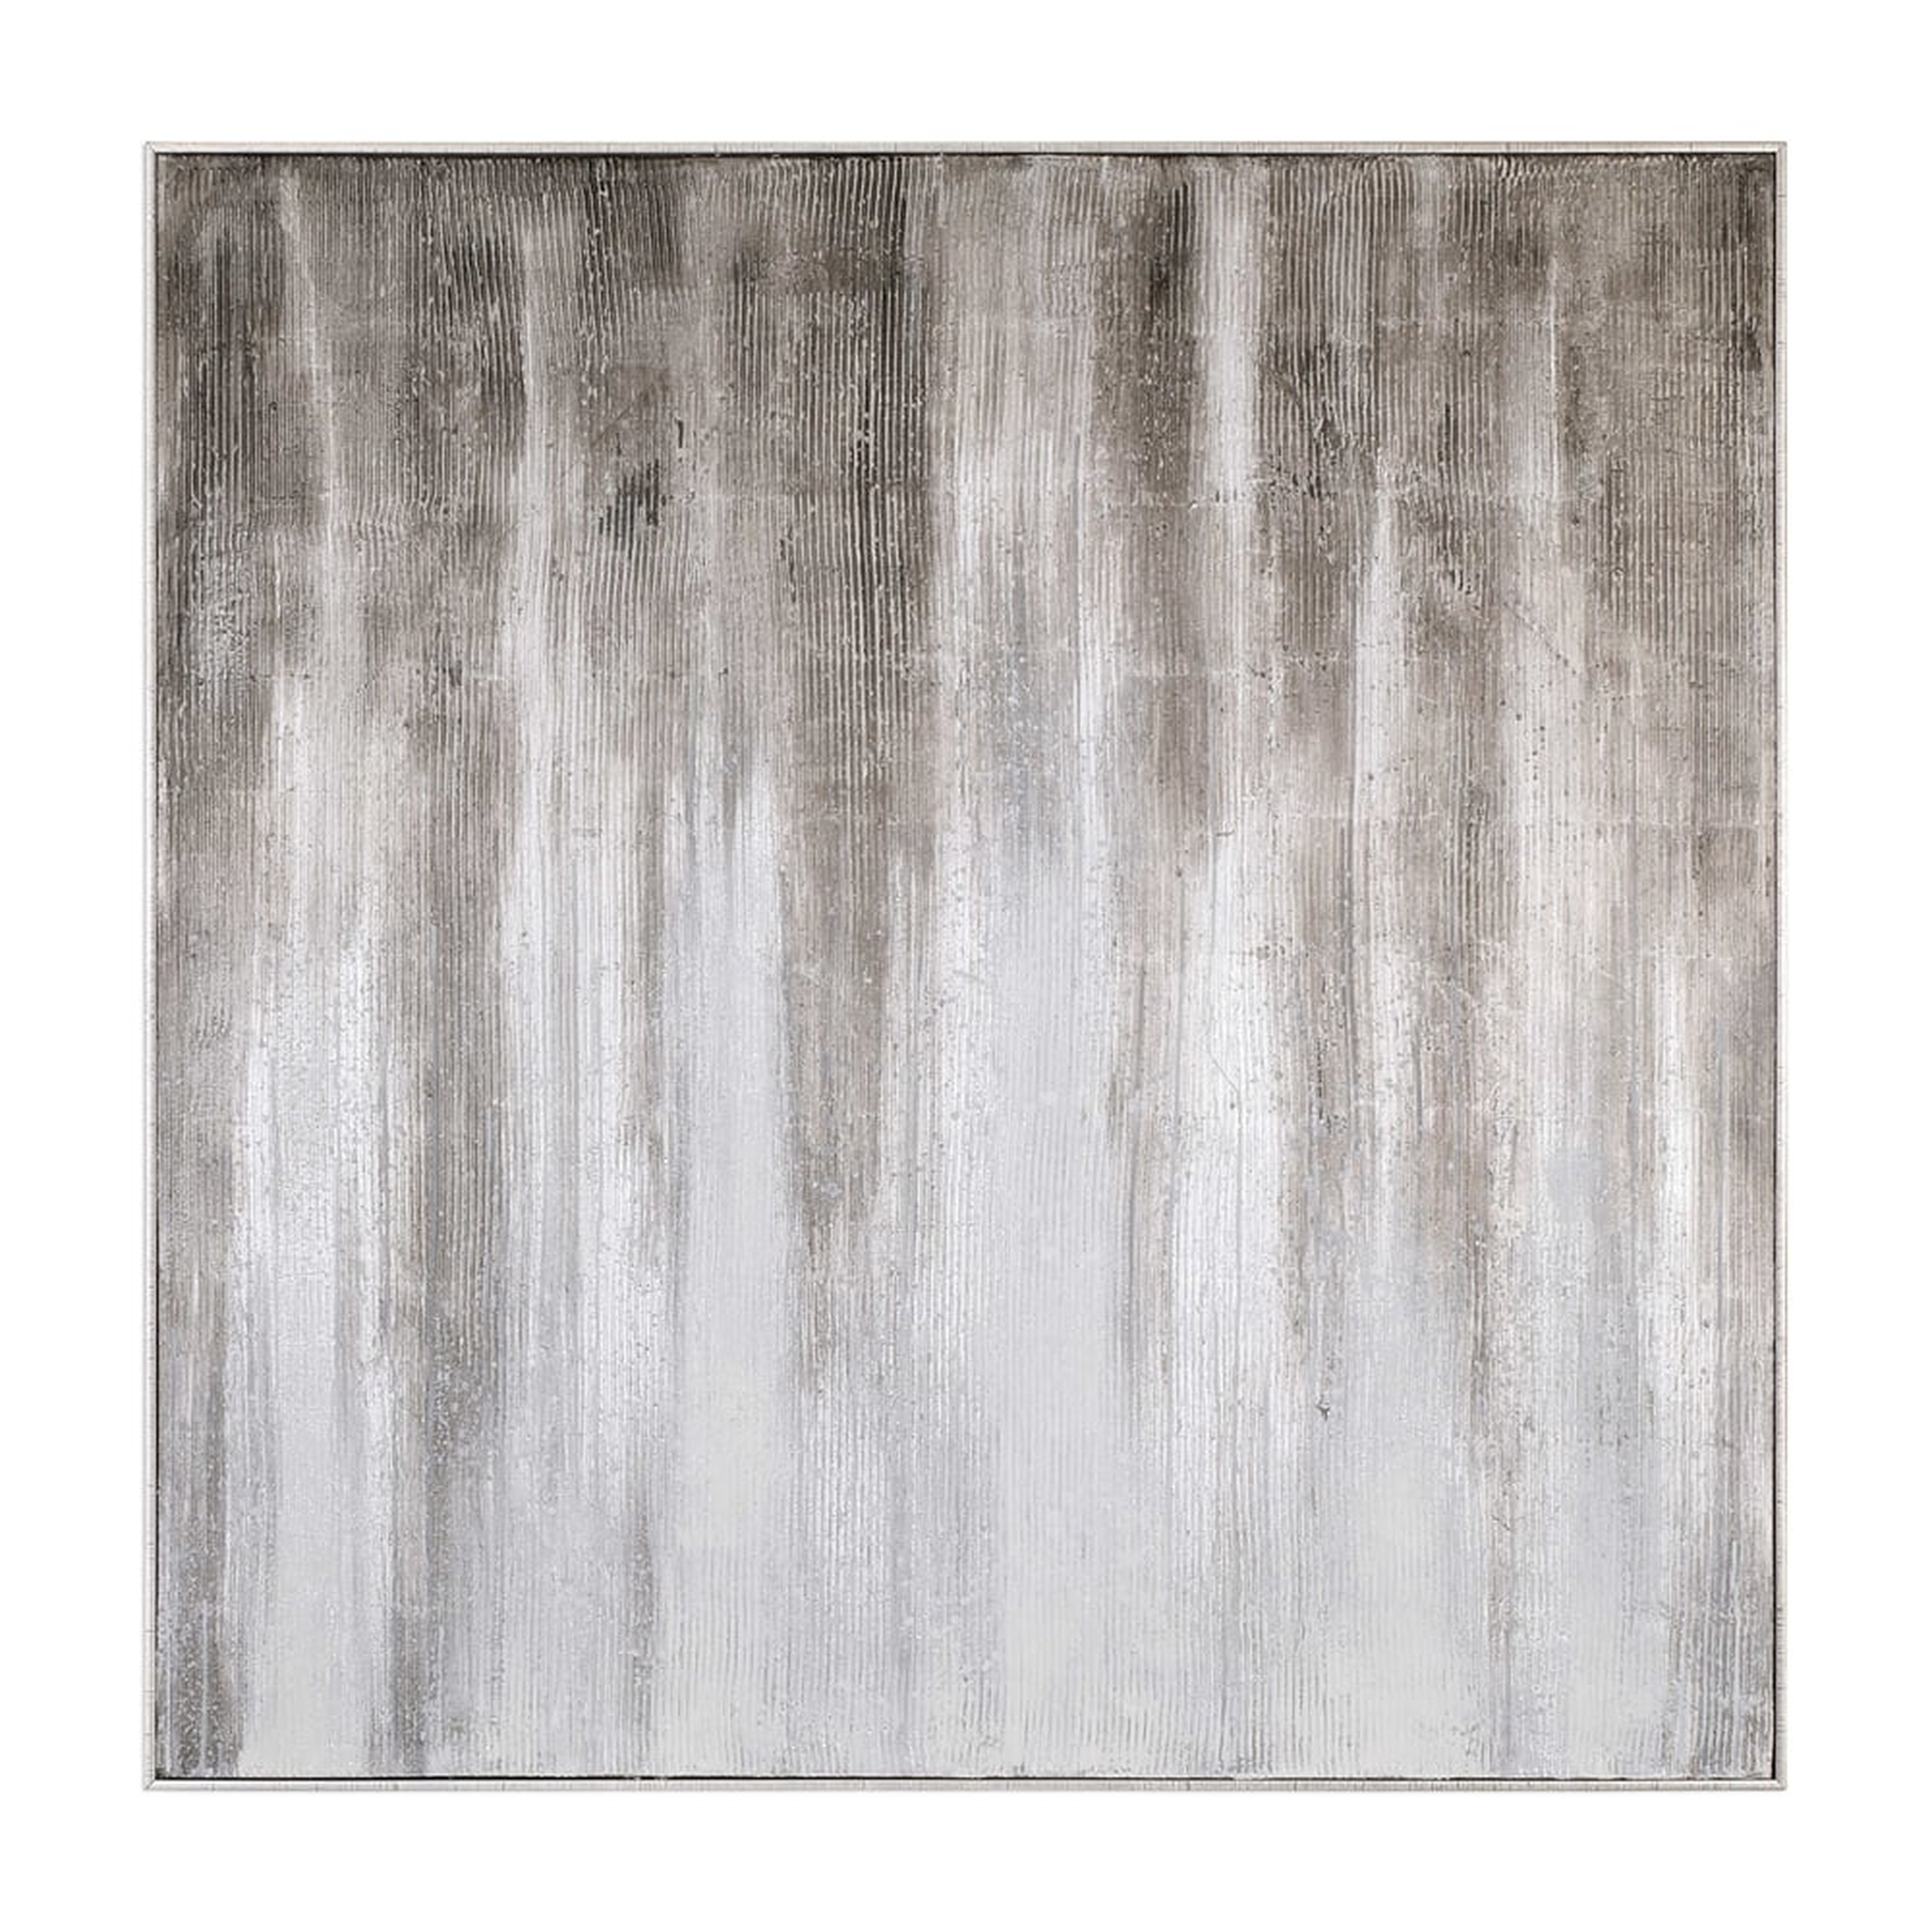 Strait and Narrow 49"x49" Canvas - Hudsonhill Foundry